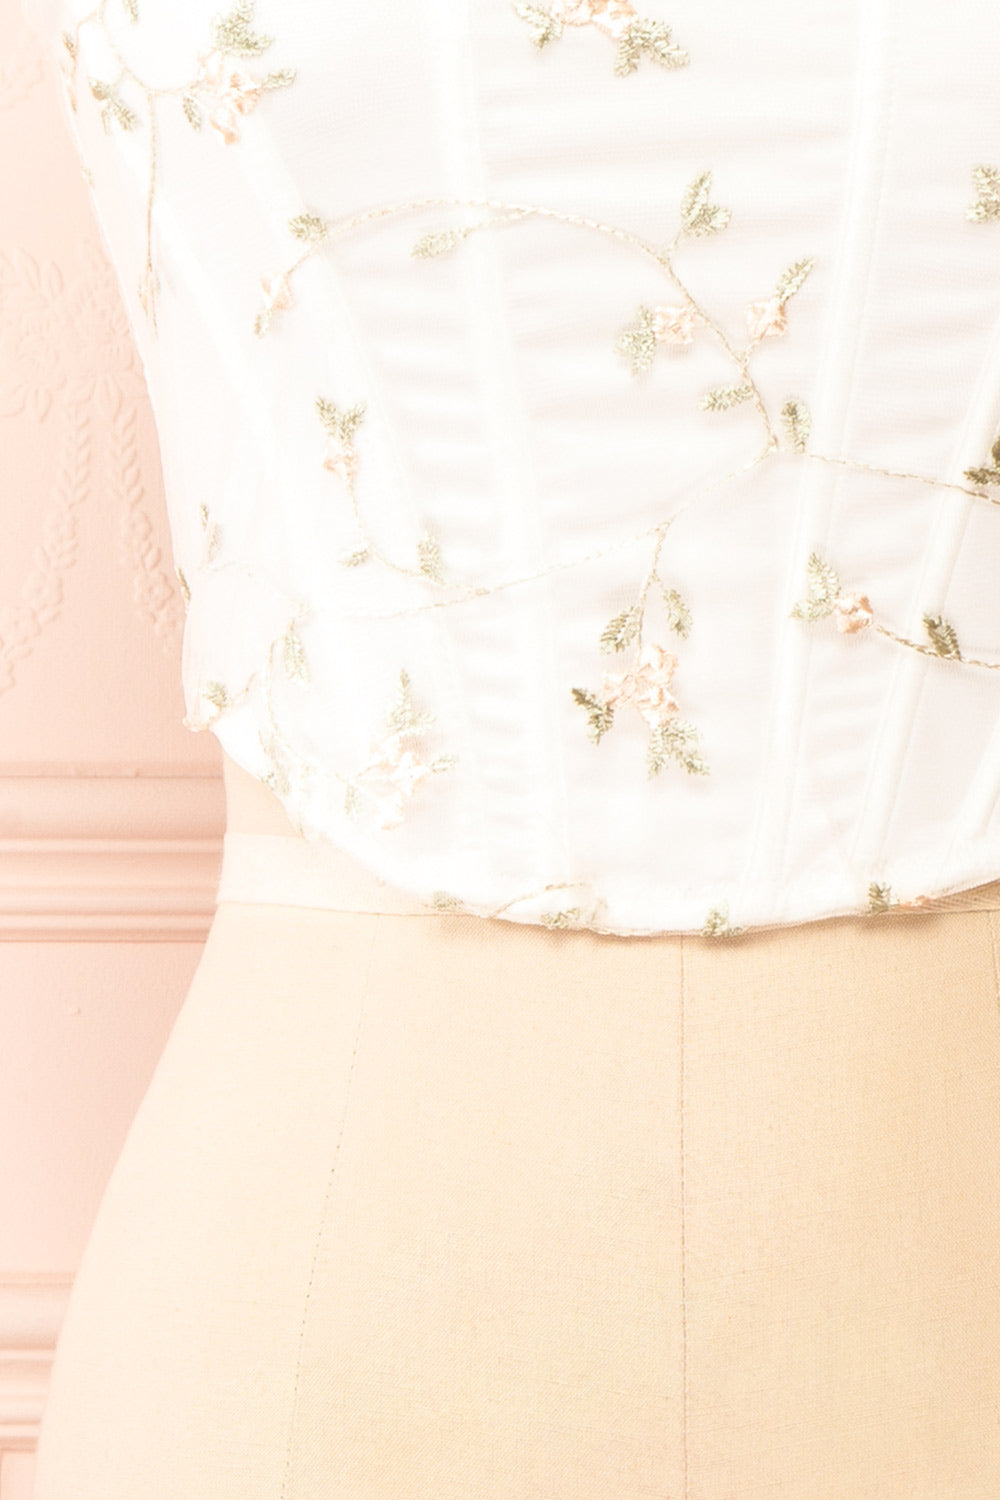 Perline Corset Crop Top w/ Floral Embroidery